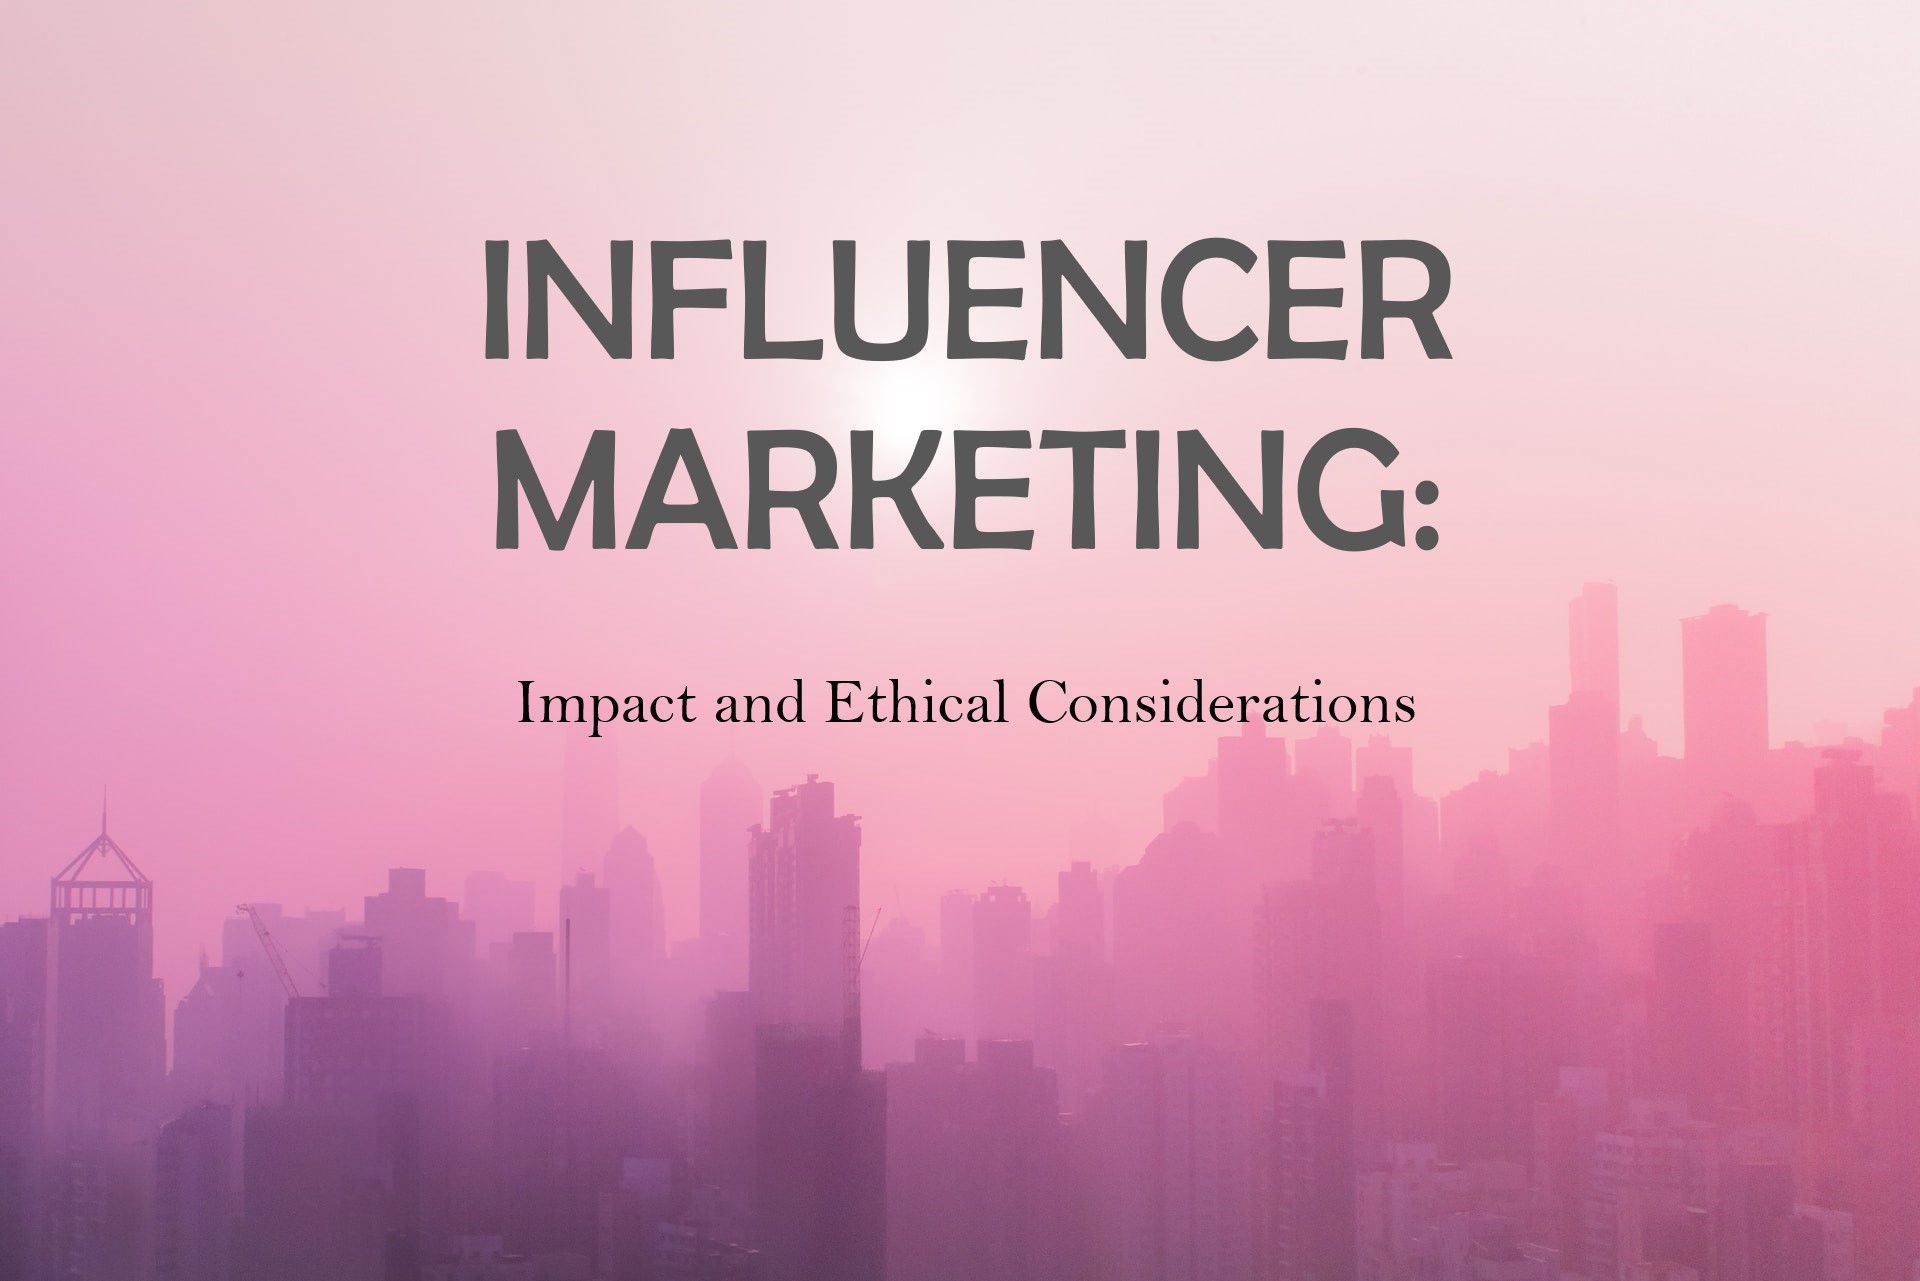 Influencer Marketing: Impact and Ethical Considerations